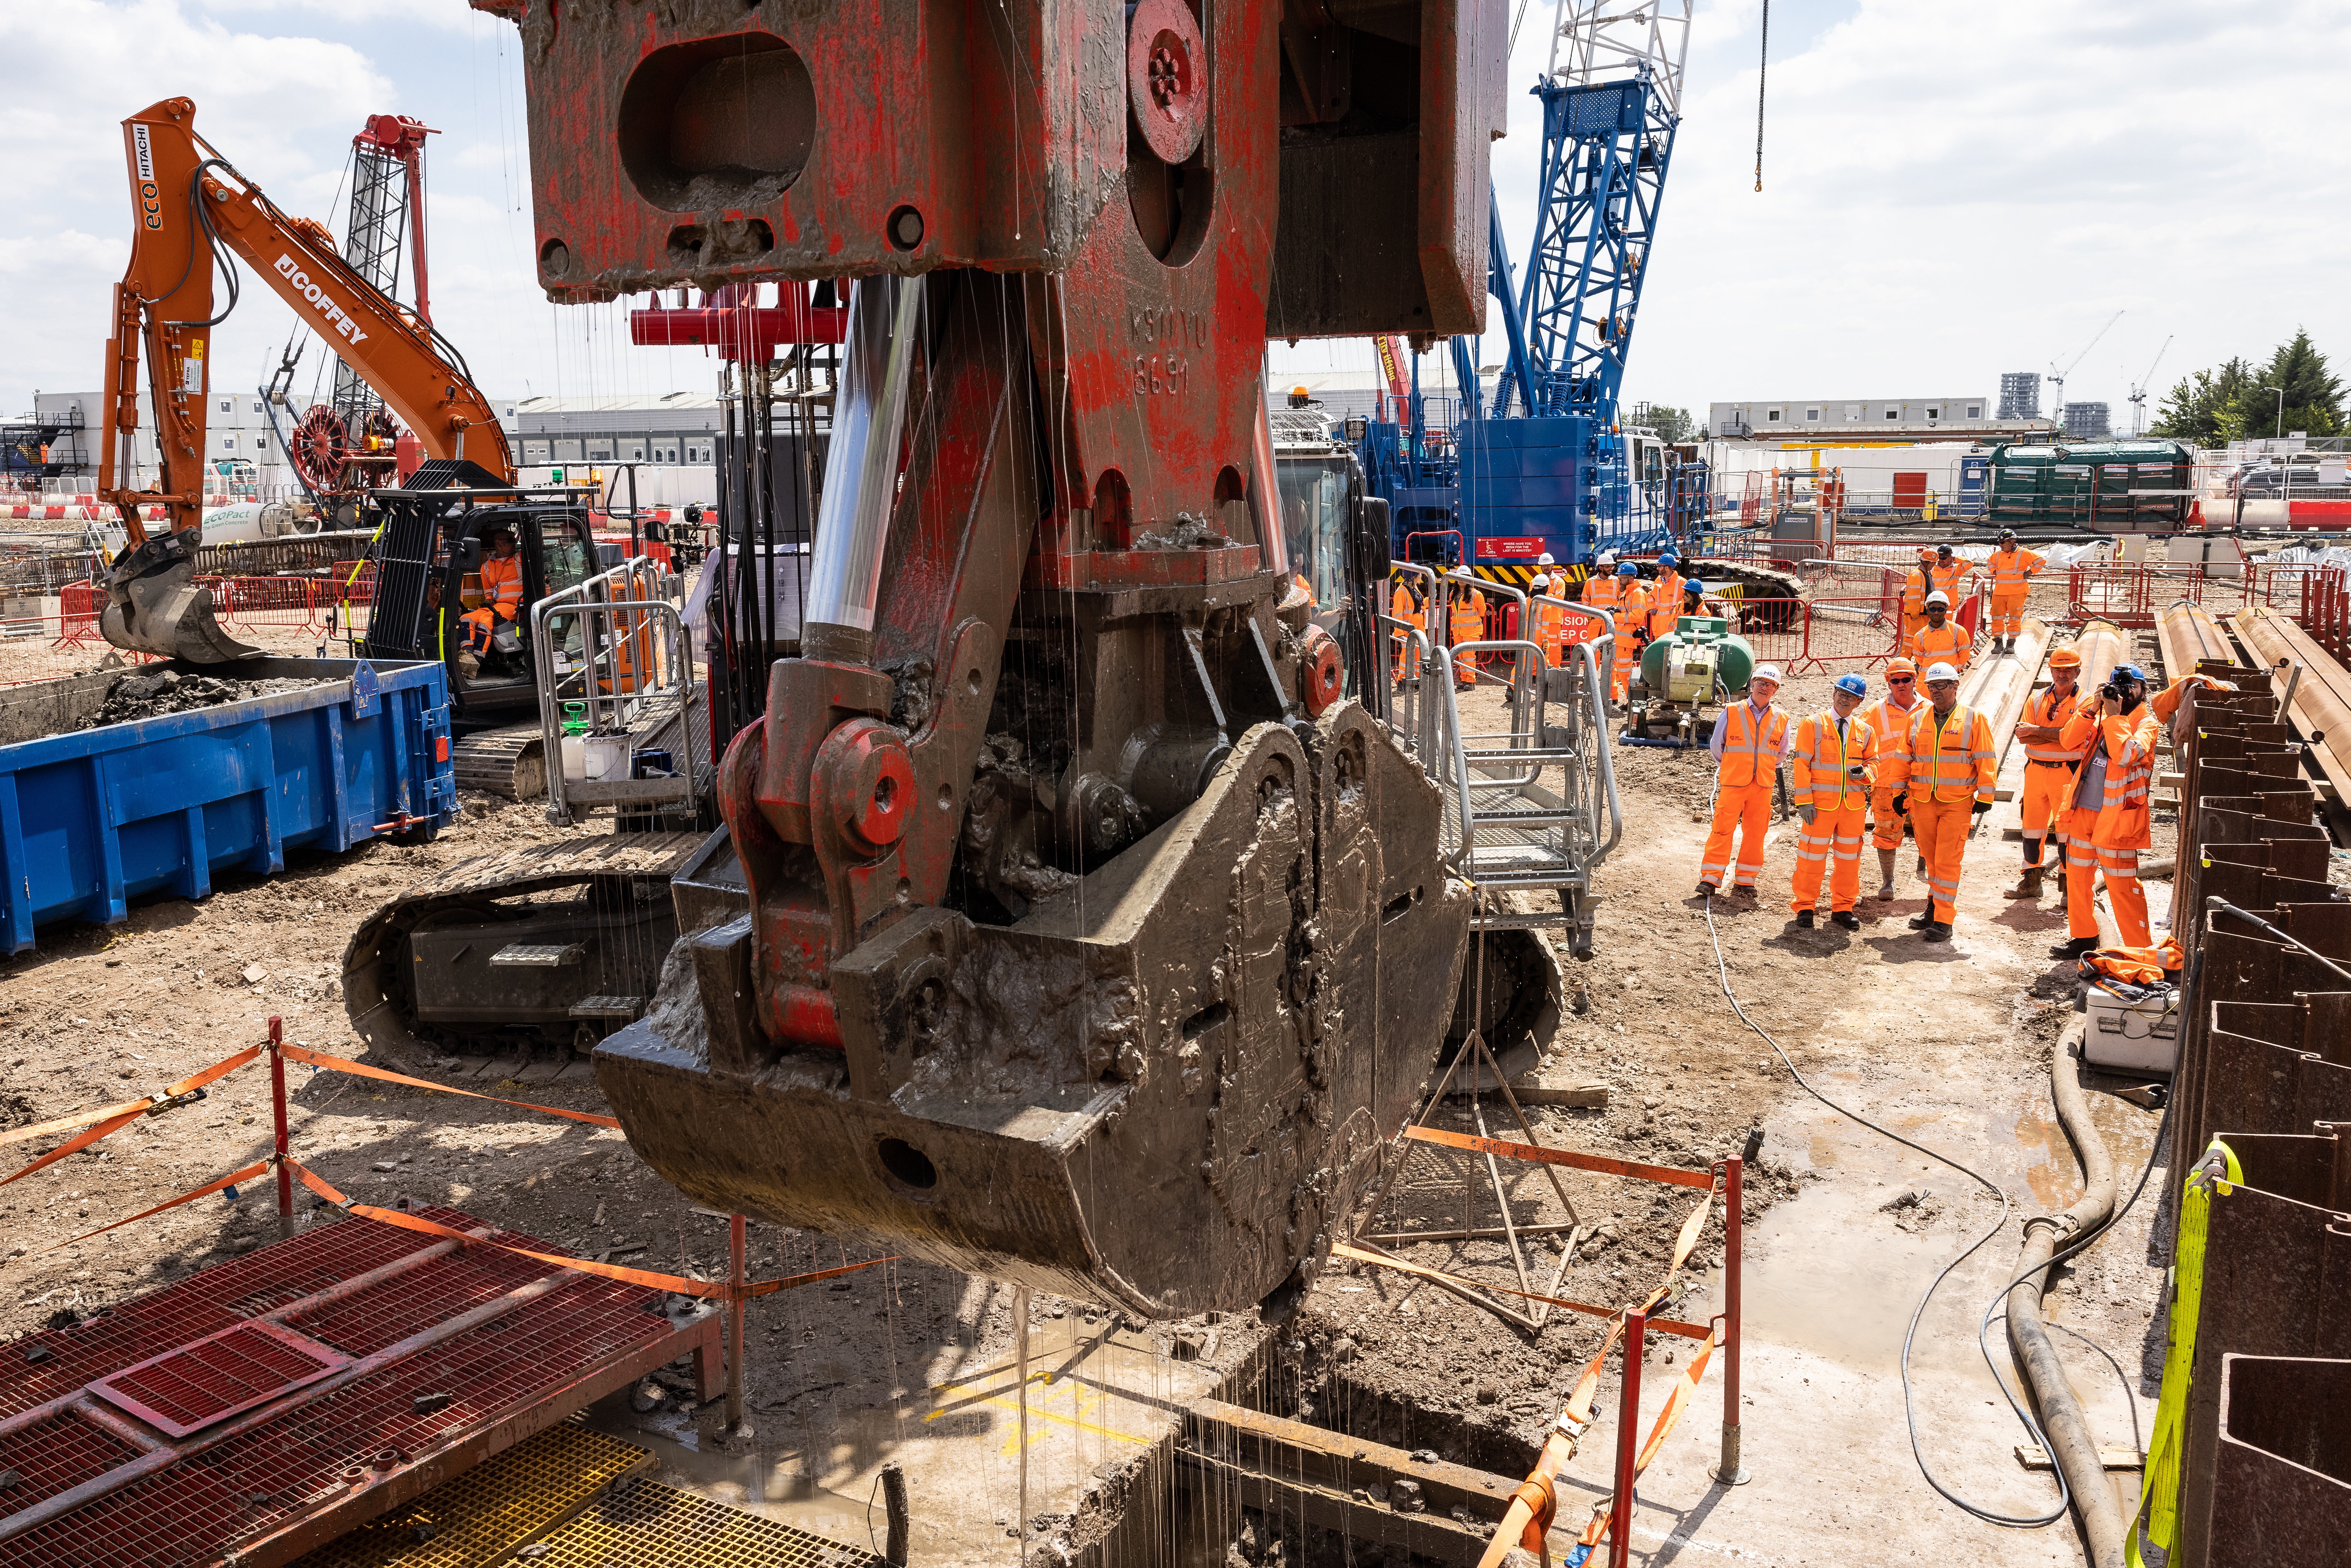 Transport secretary Grant Shapps gives engineers the go-ahead to work on the HS2 station at Old Oak Common in June 2021